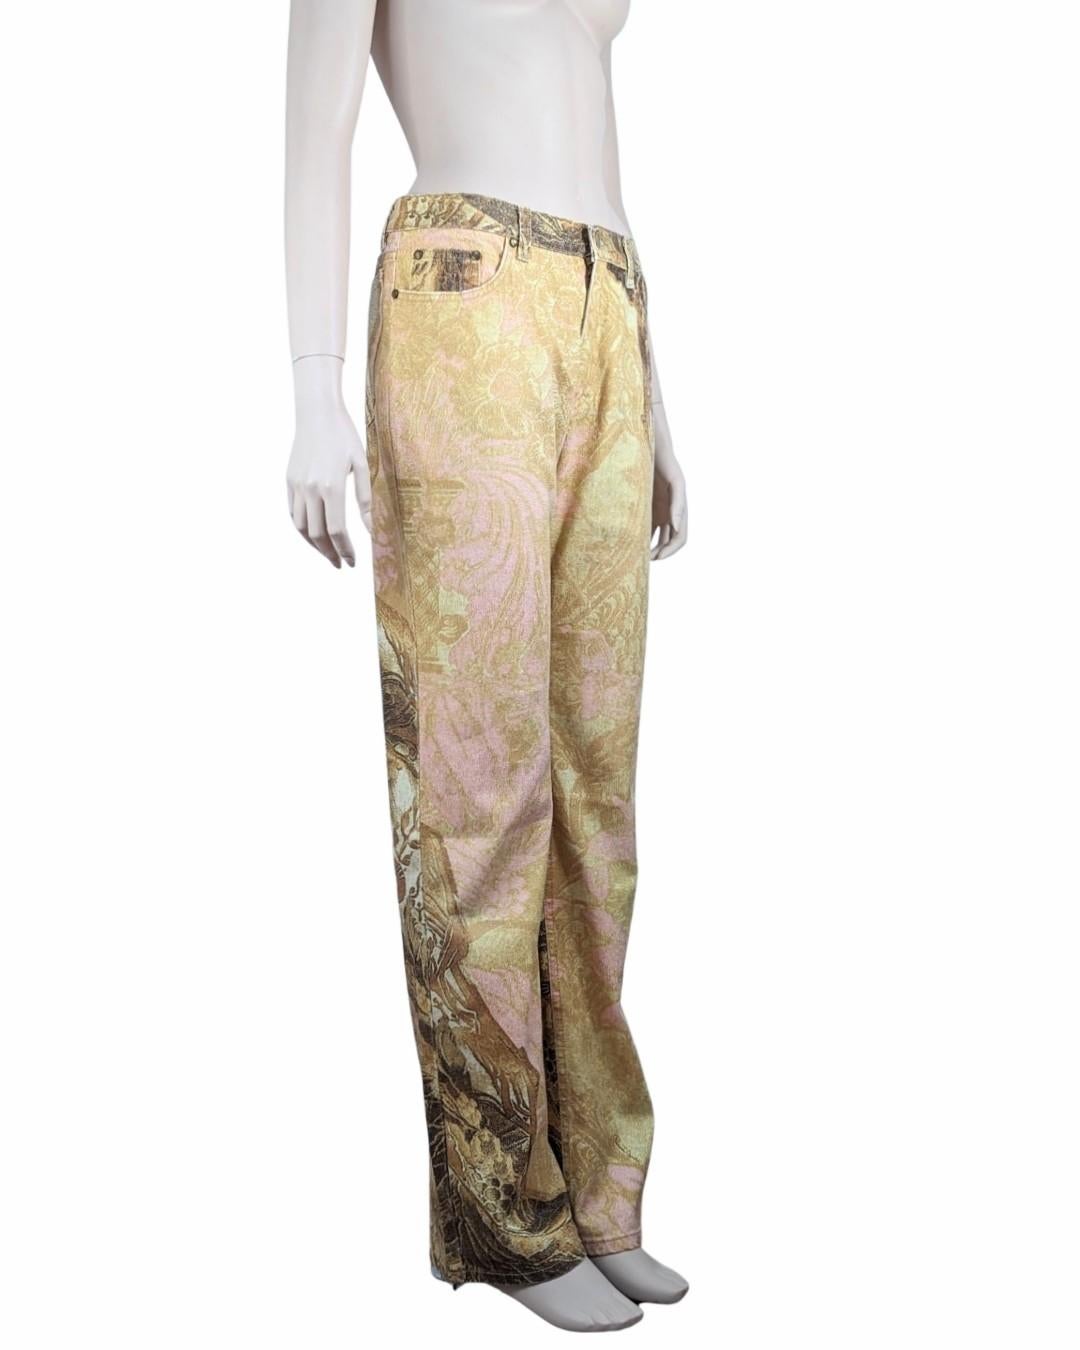 Roberto Cavalli F/W 2001 Gold Leaf Jeans For Sale 1